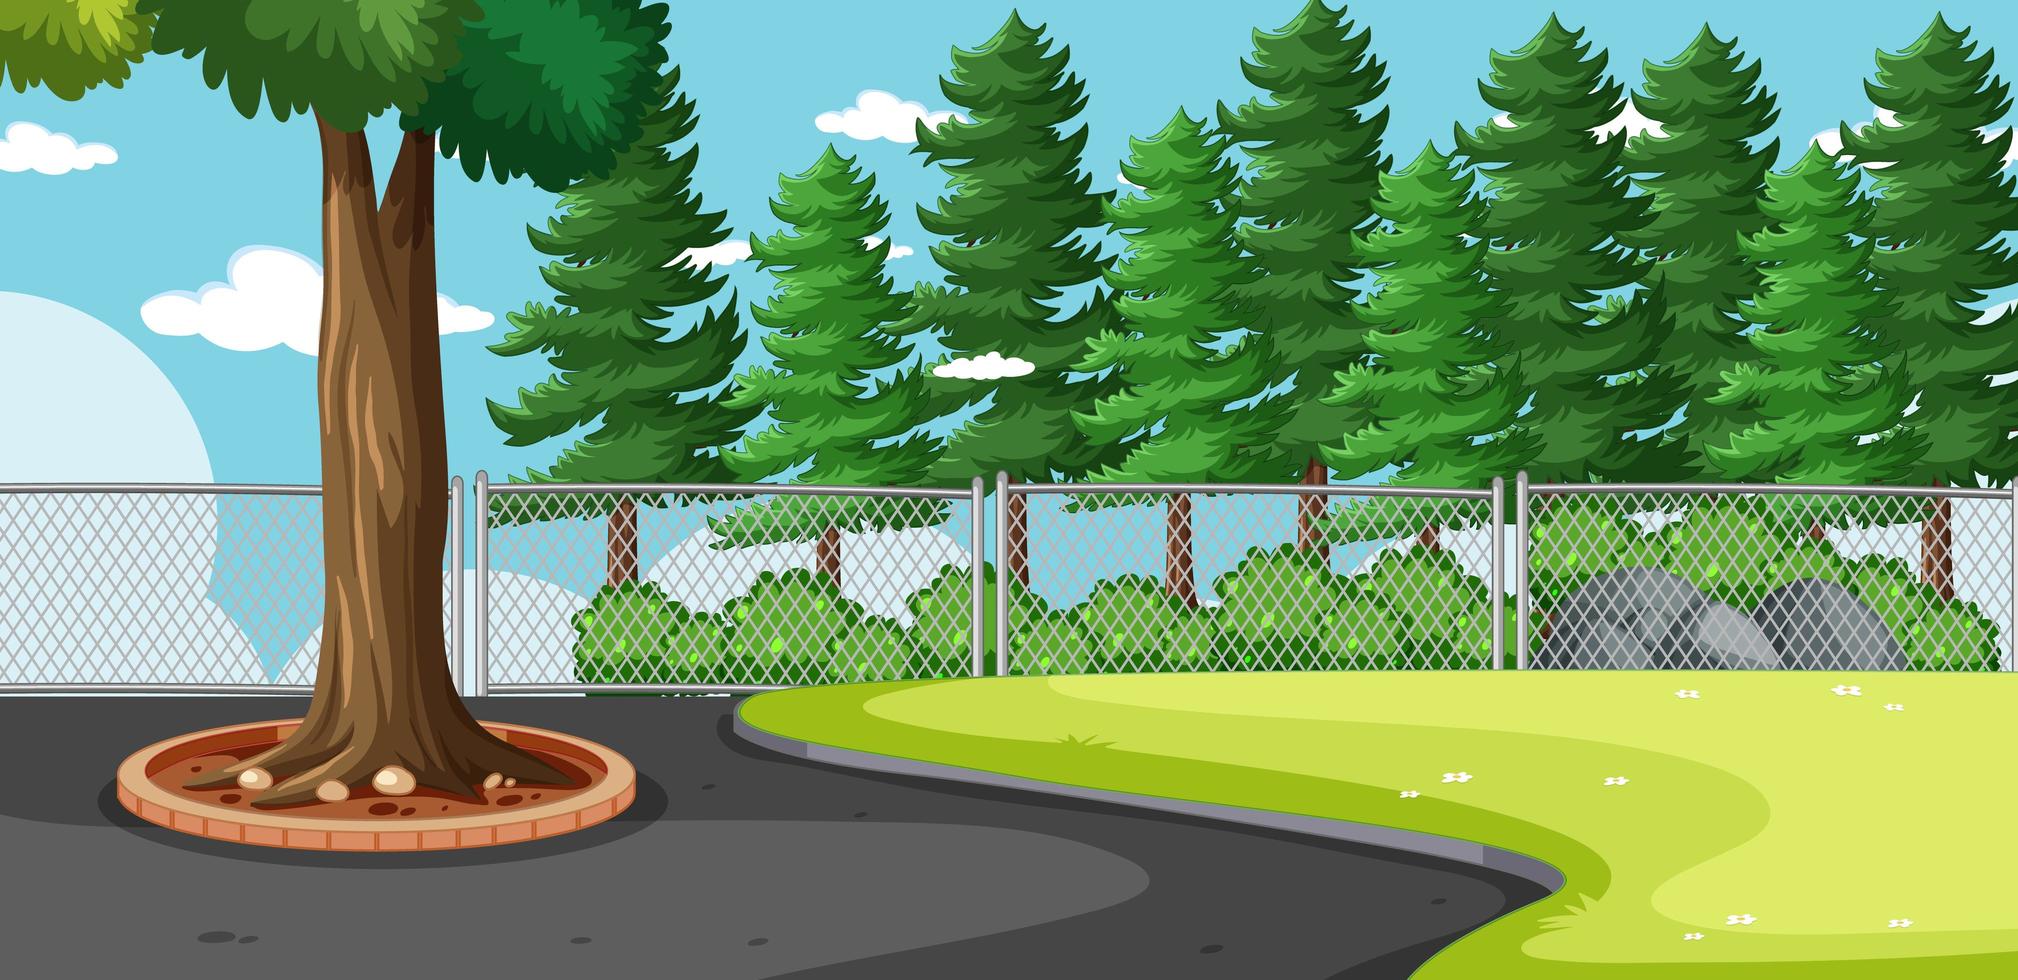 Outdoors scene with pine trees vector